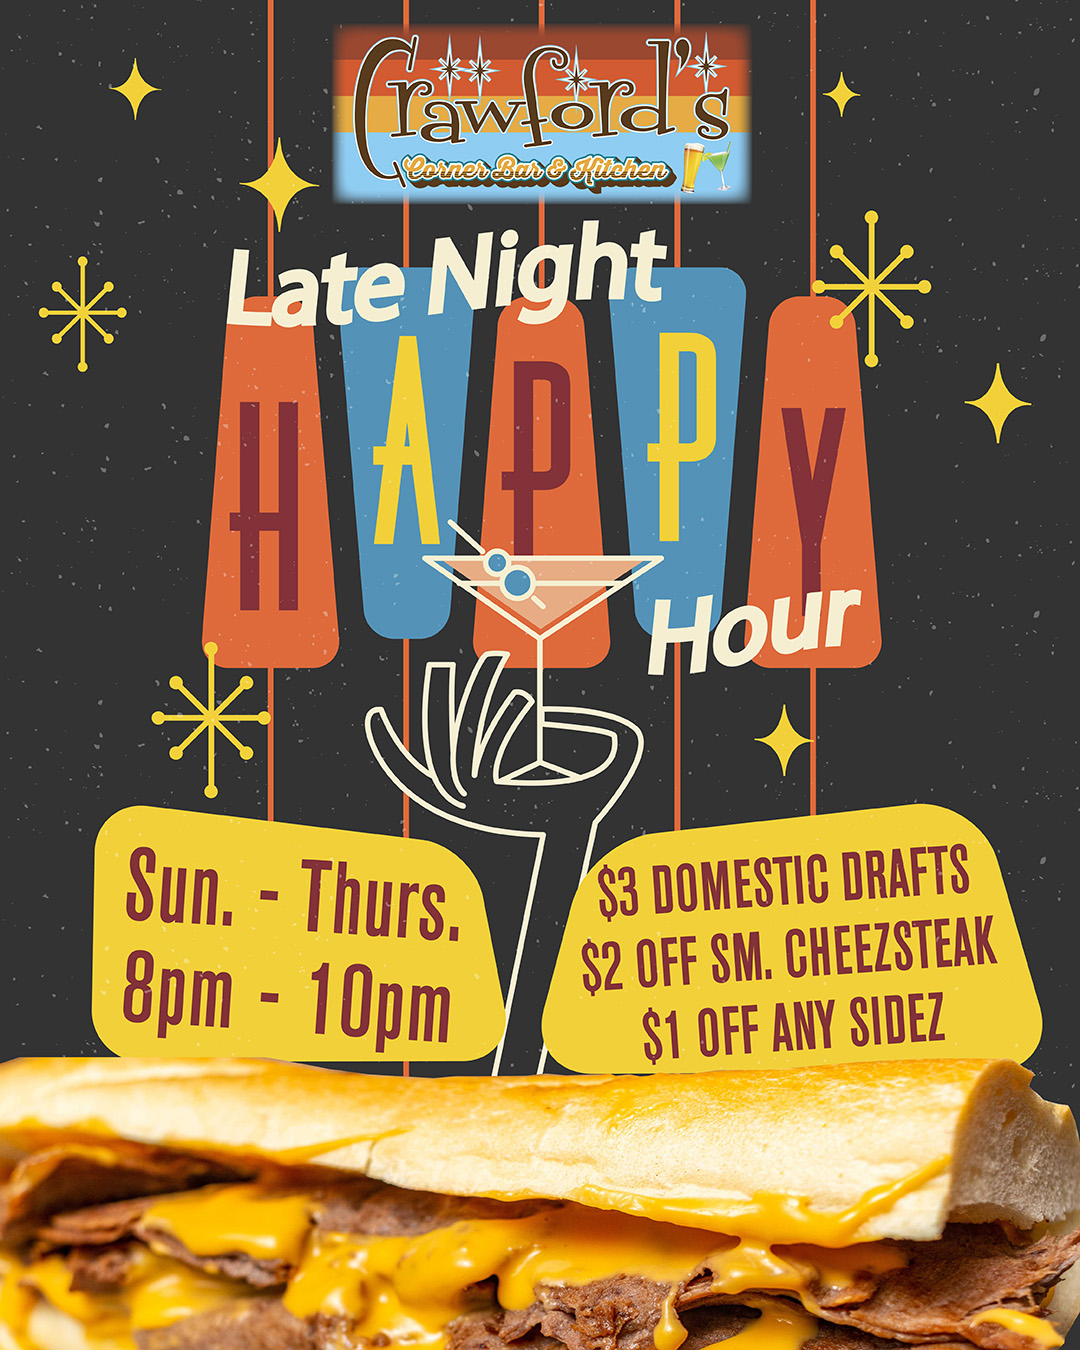 A flyer for late night happy hour at cavallo's.